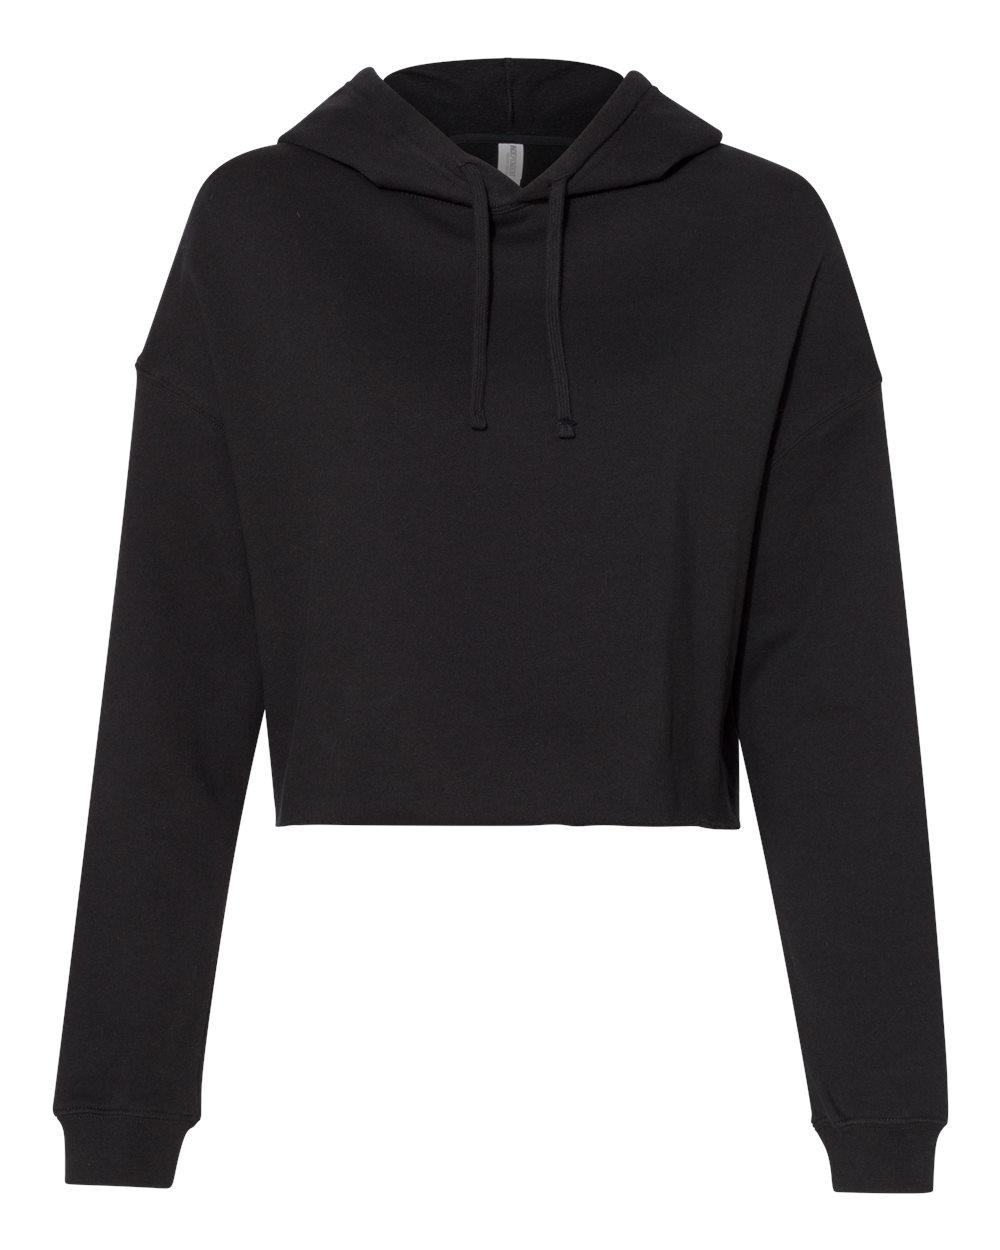 Hoodies - Independent Trading Co. - Women’s Lightweight Cropped Hooded Sweatshirt - AFX64CRP